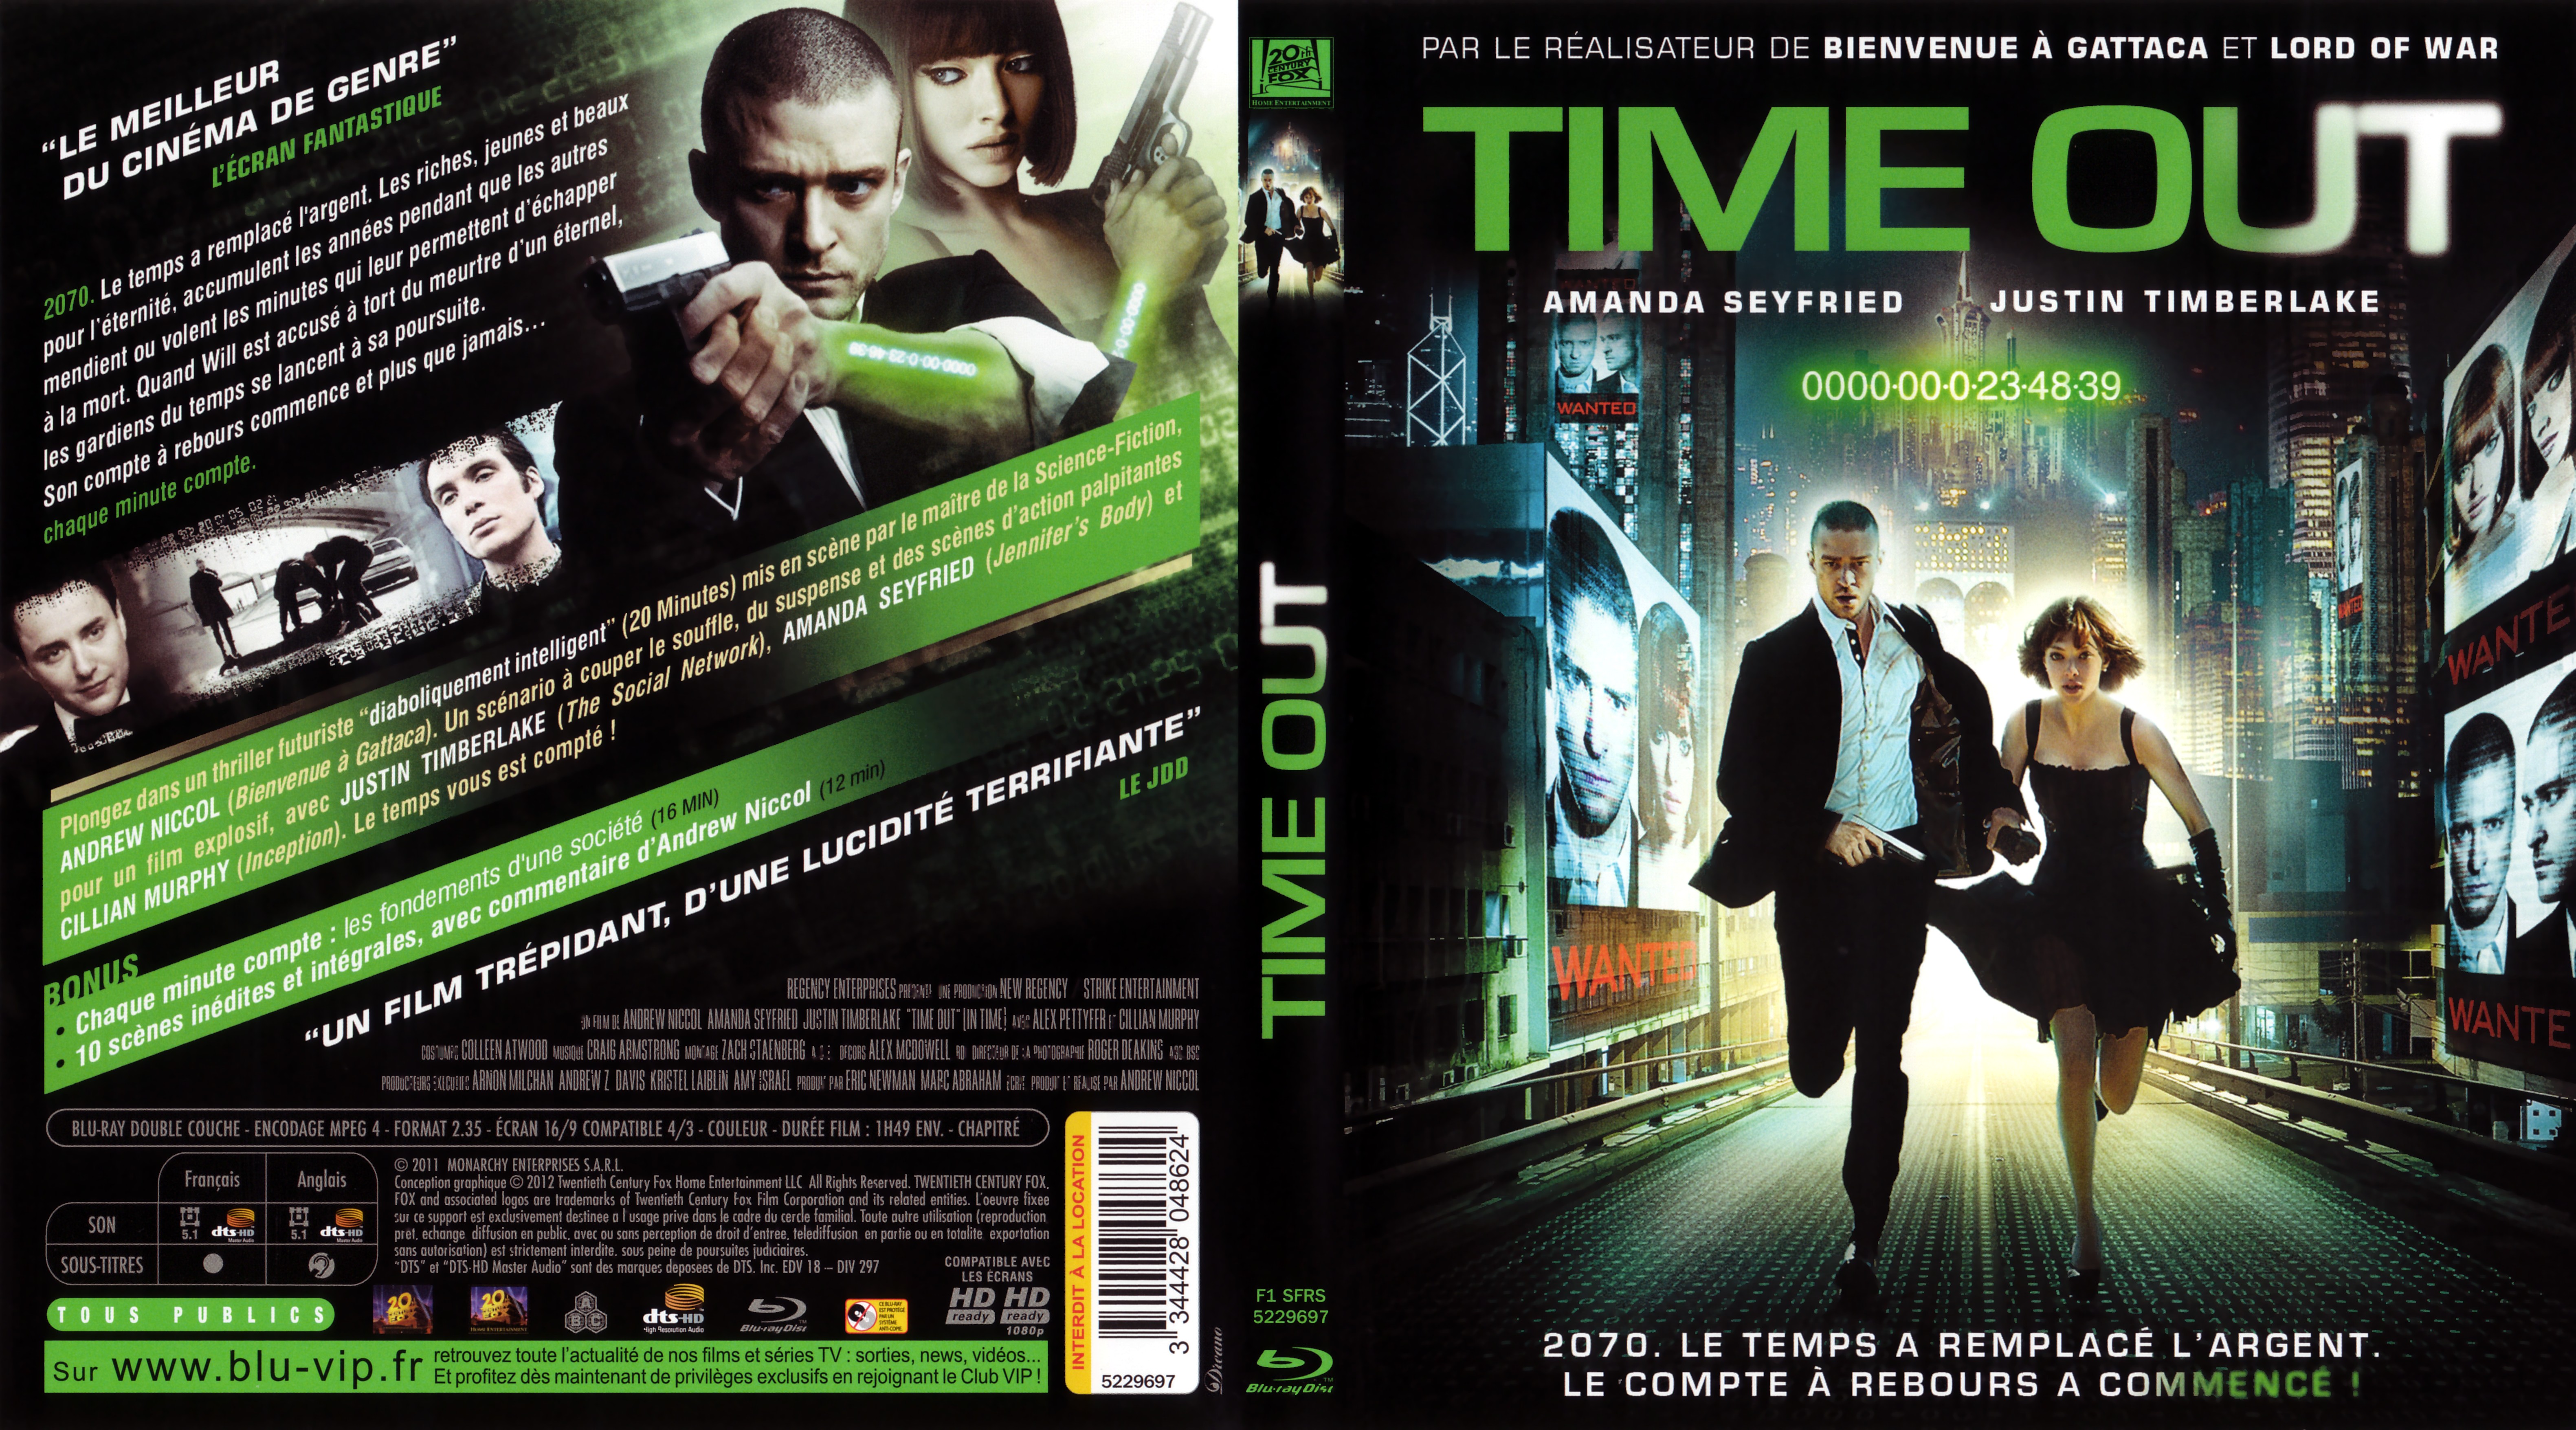 Jaquette DVD Time out (BLU-RAY) v2